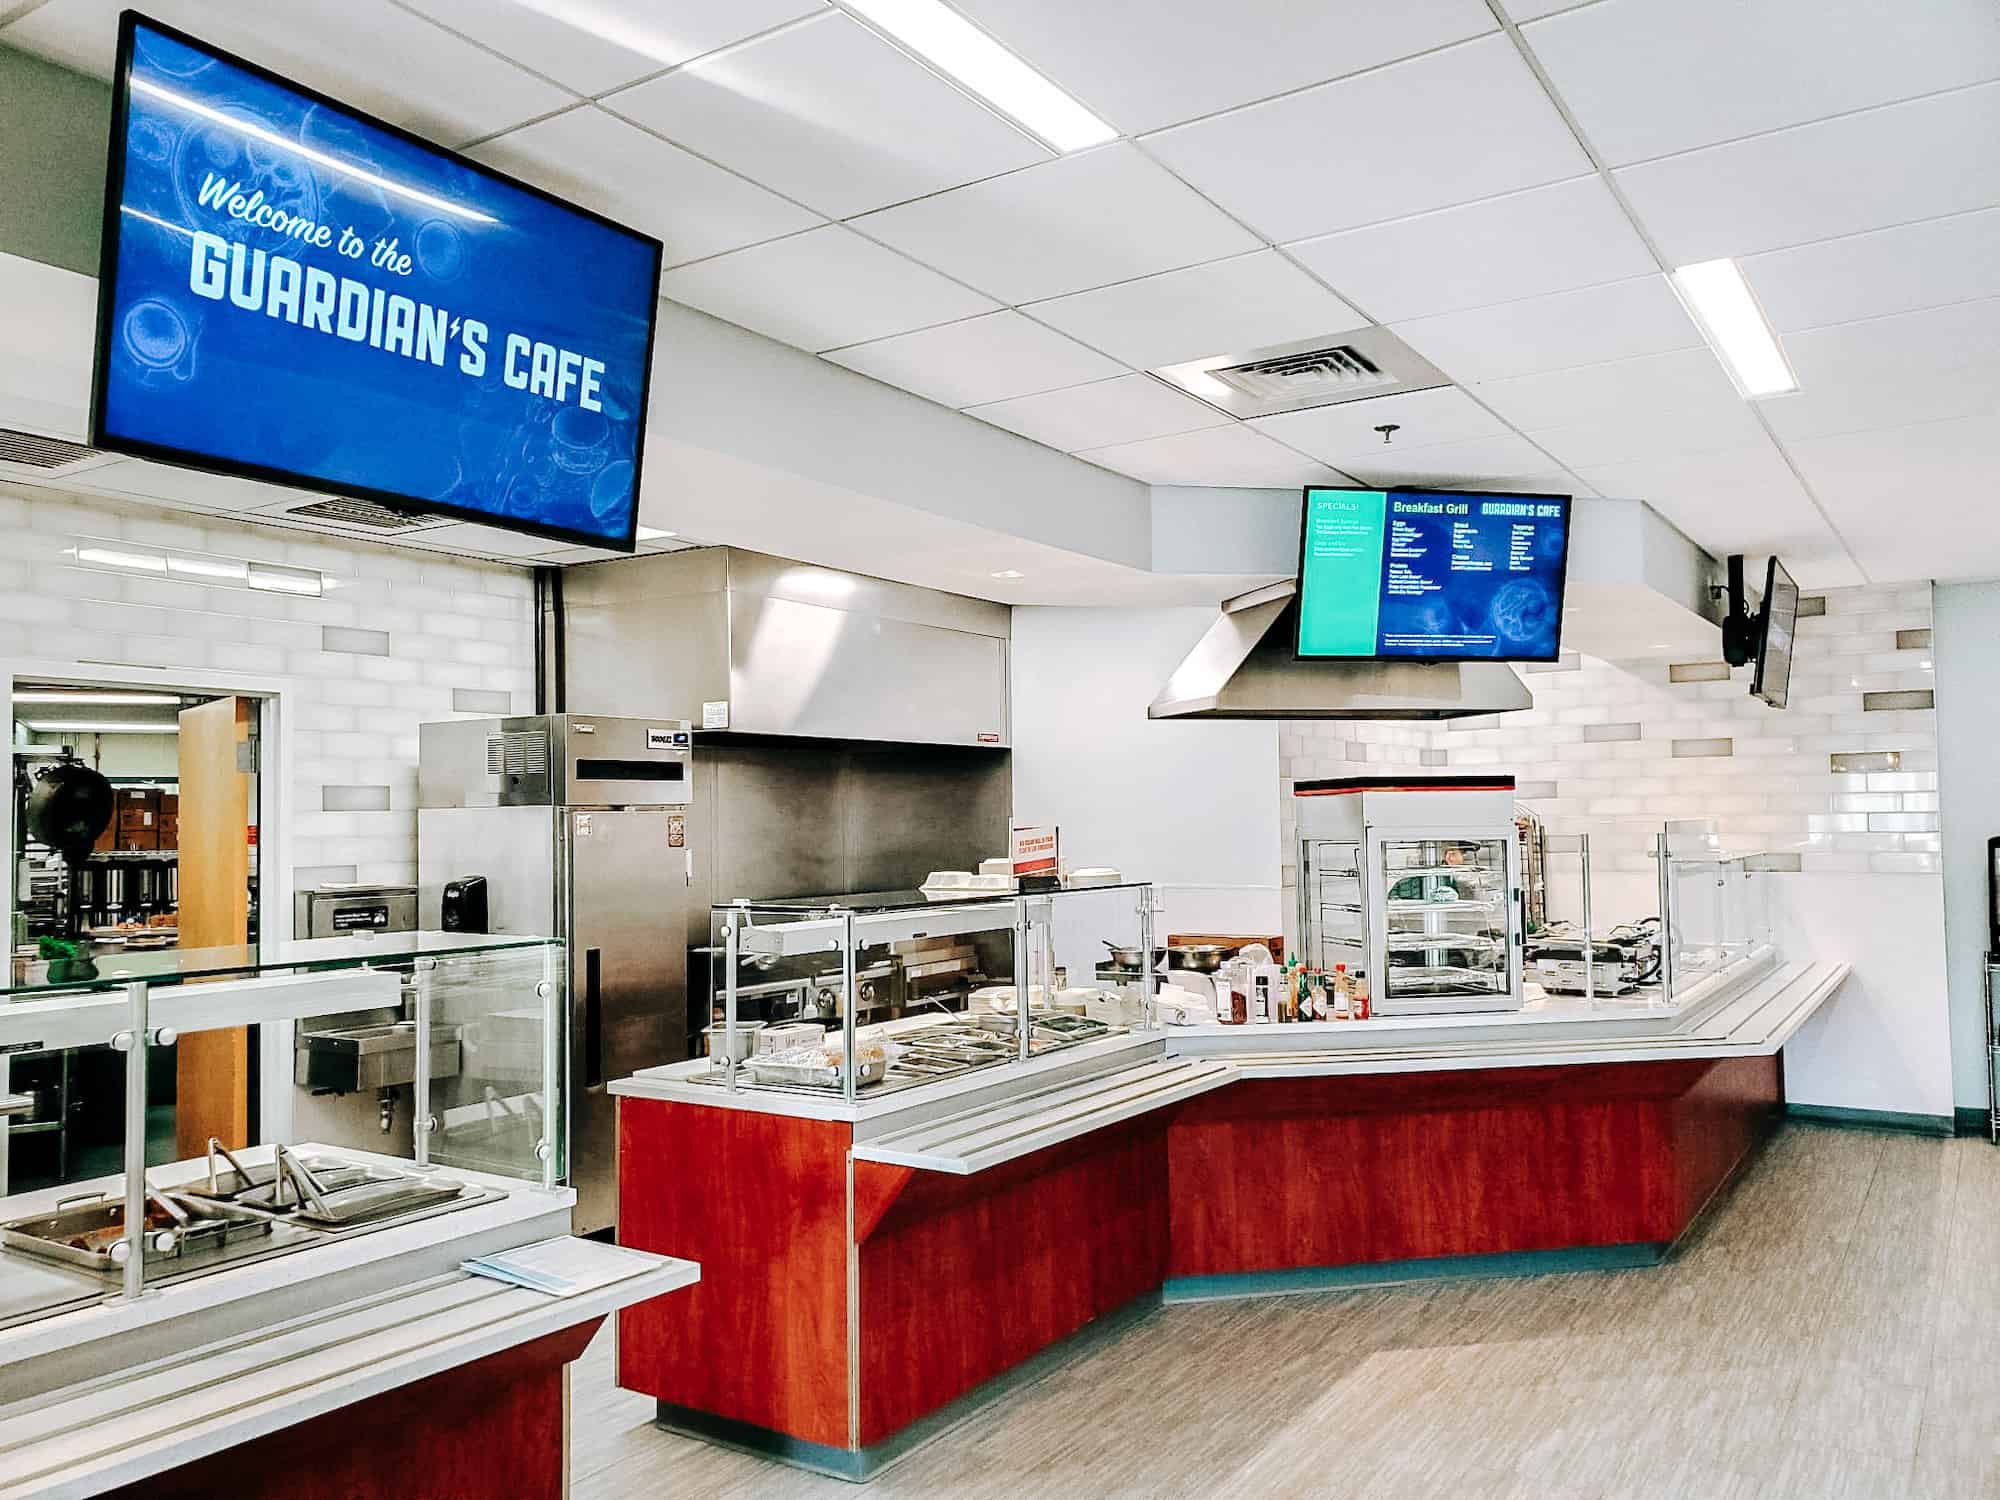 A cafeteria-style restaurant with food counters and a grill area. Digital signage displaying the name of the restaurant (Guardian's Cafe) and a menu are mounted on the ceiling.